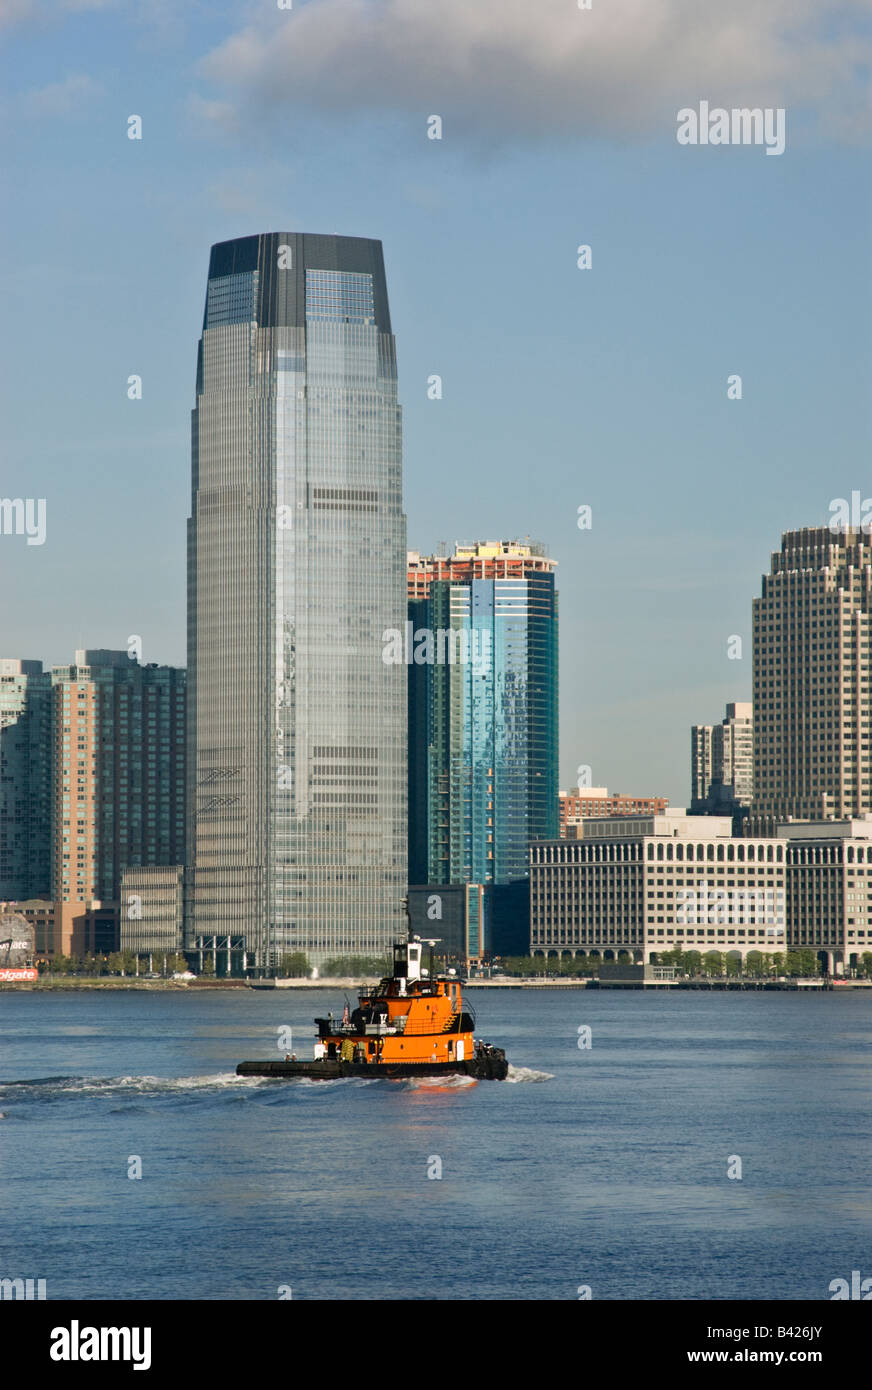 The Goldman Sachs Tower in Jersey City, NJ across the Hudson River from Manhattan Stock Photo